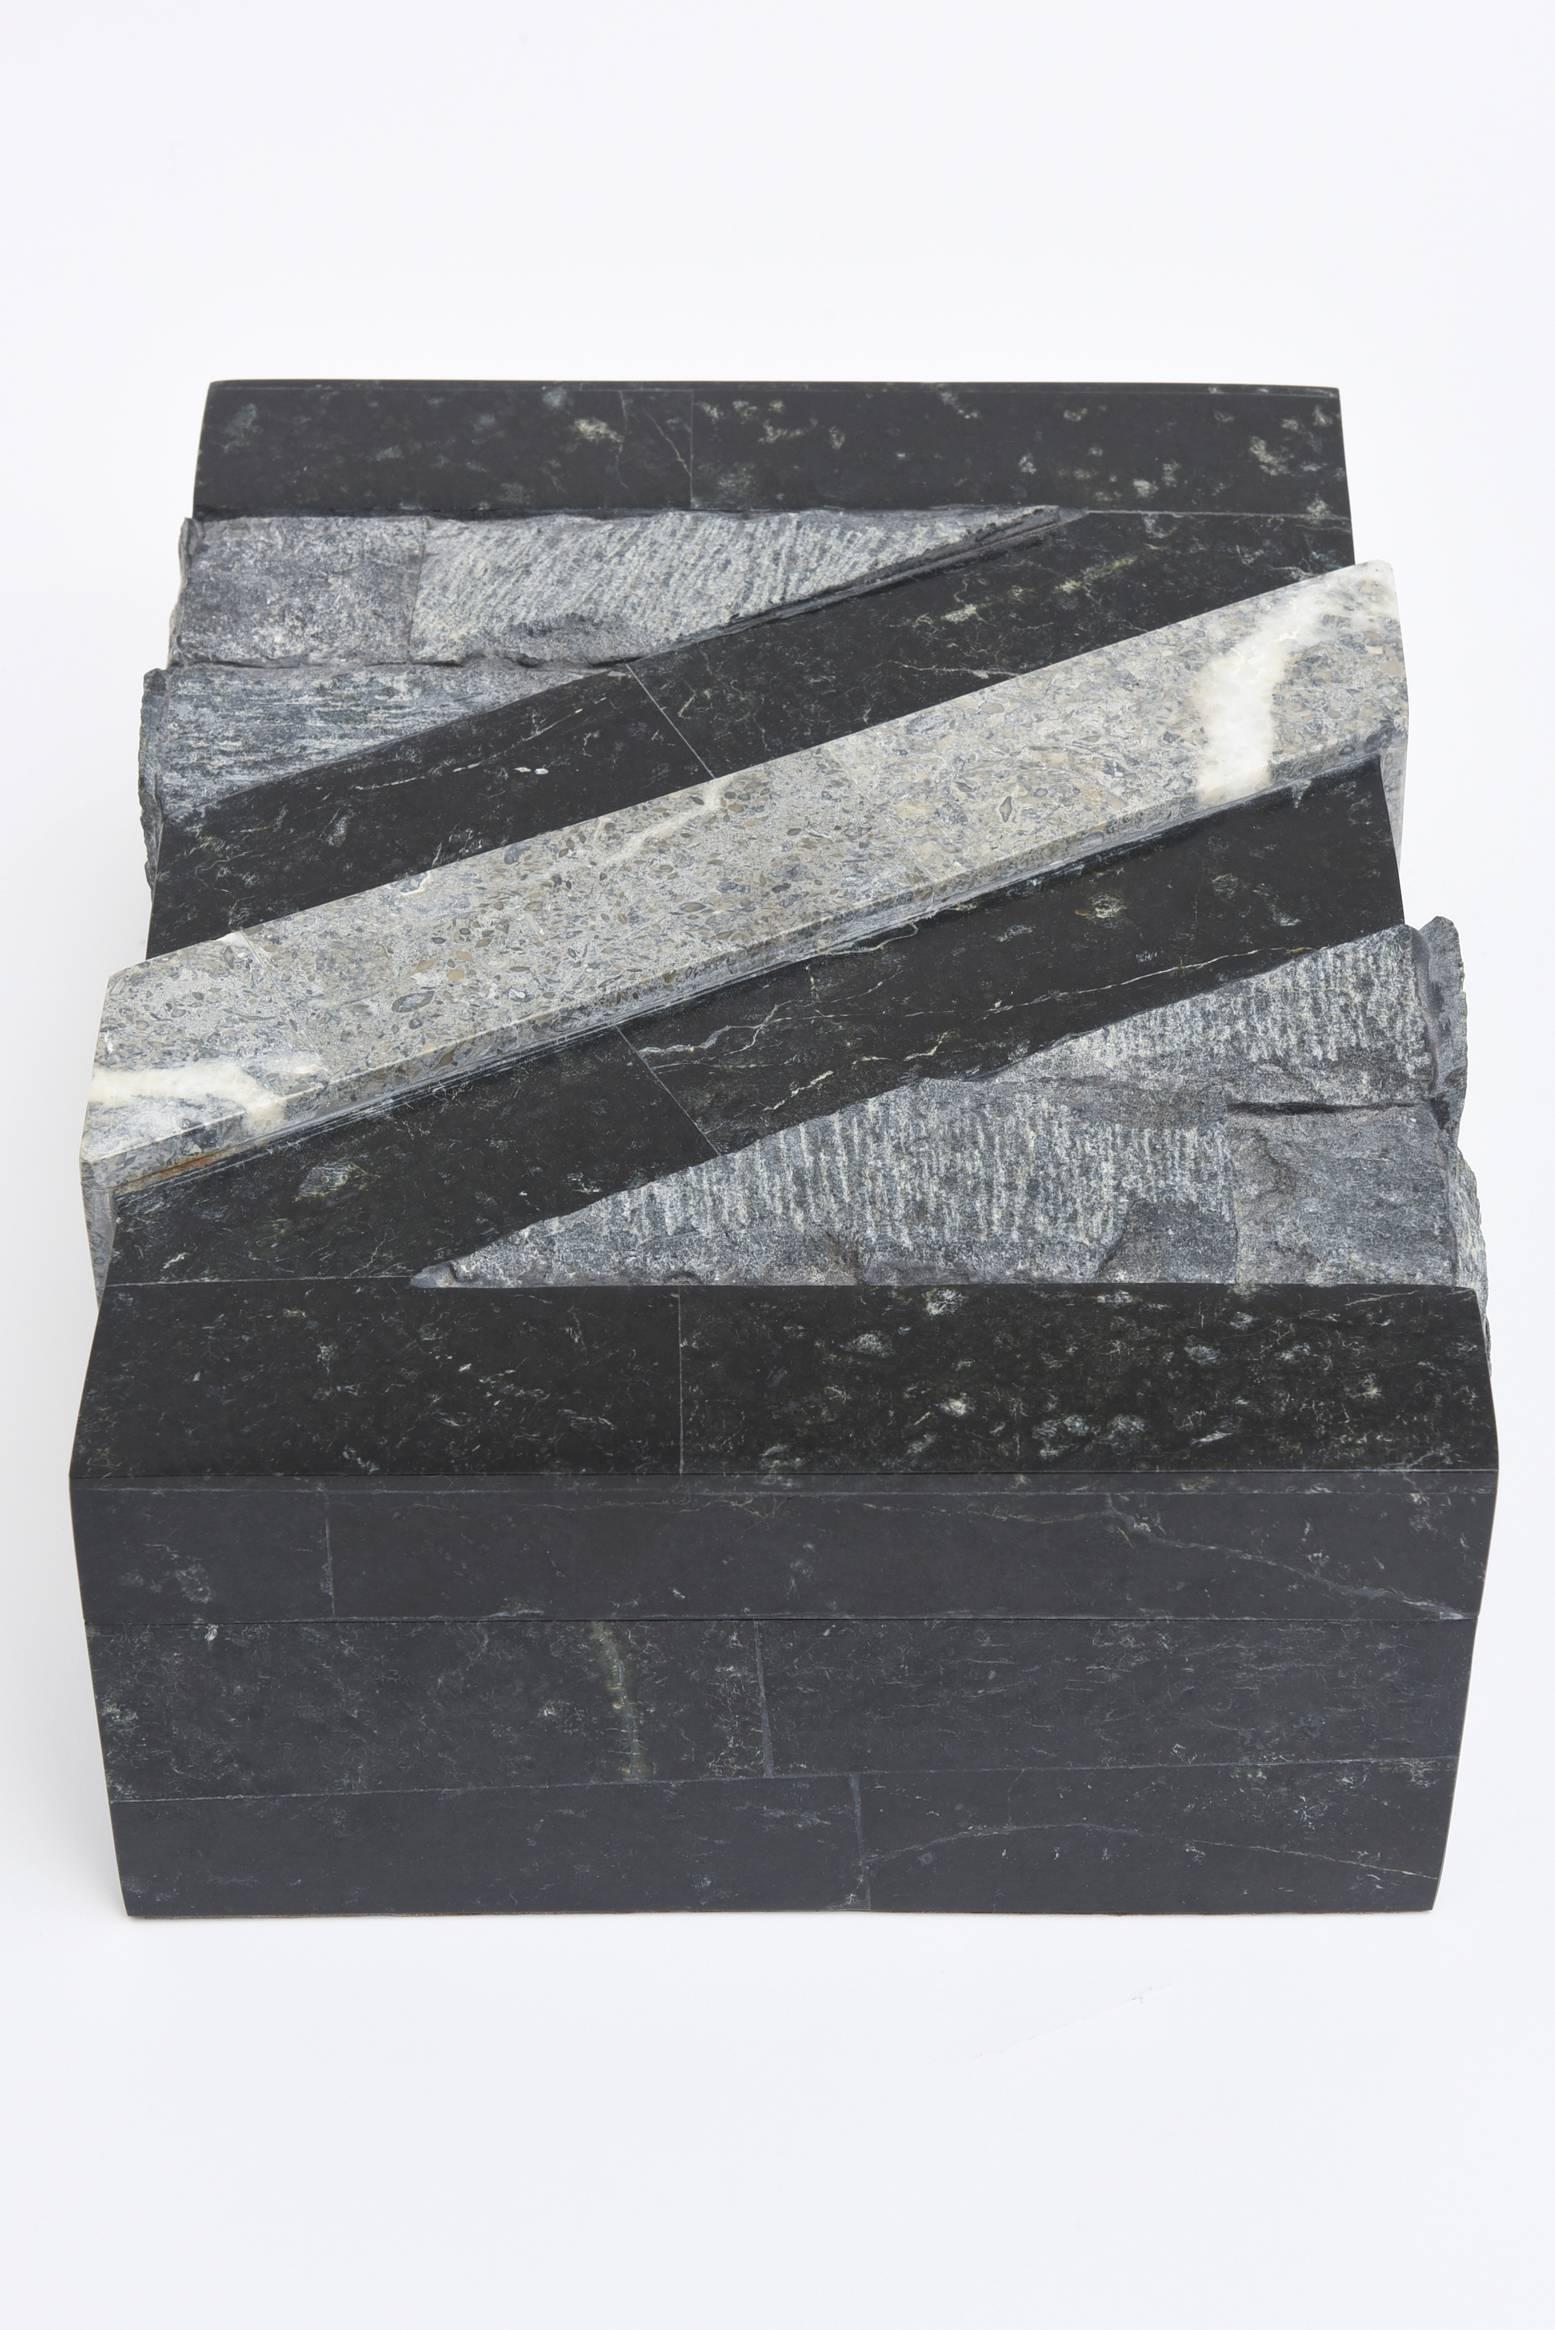 Textural Polished and Unpolished Stone and Wood Large Sculptural Box 1